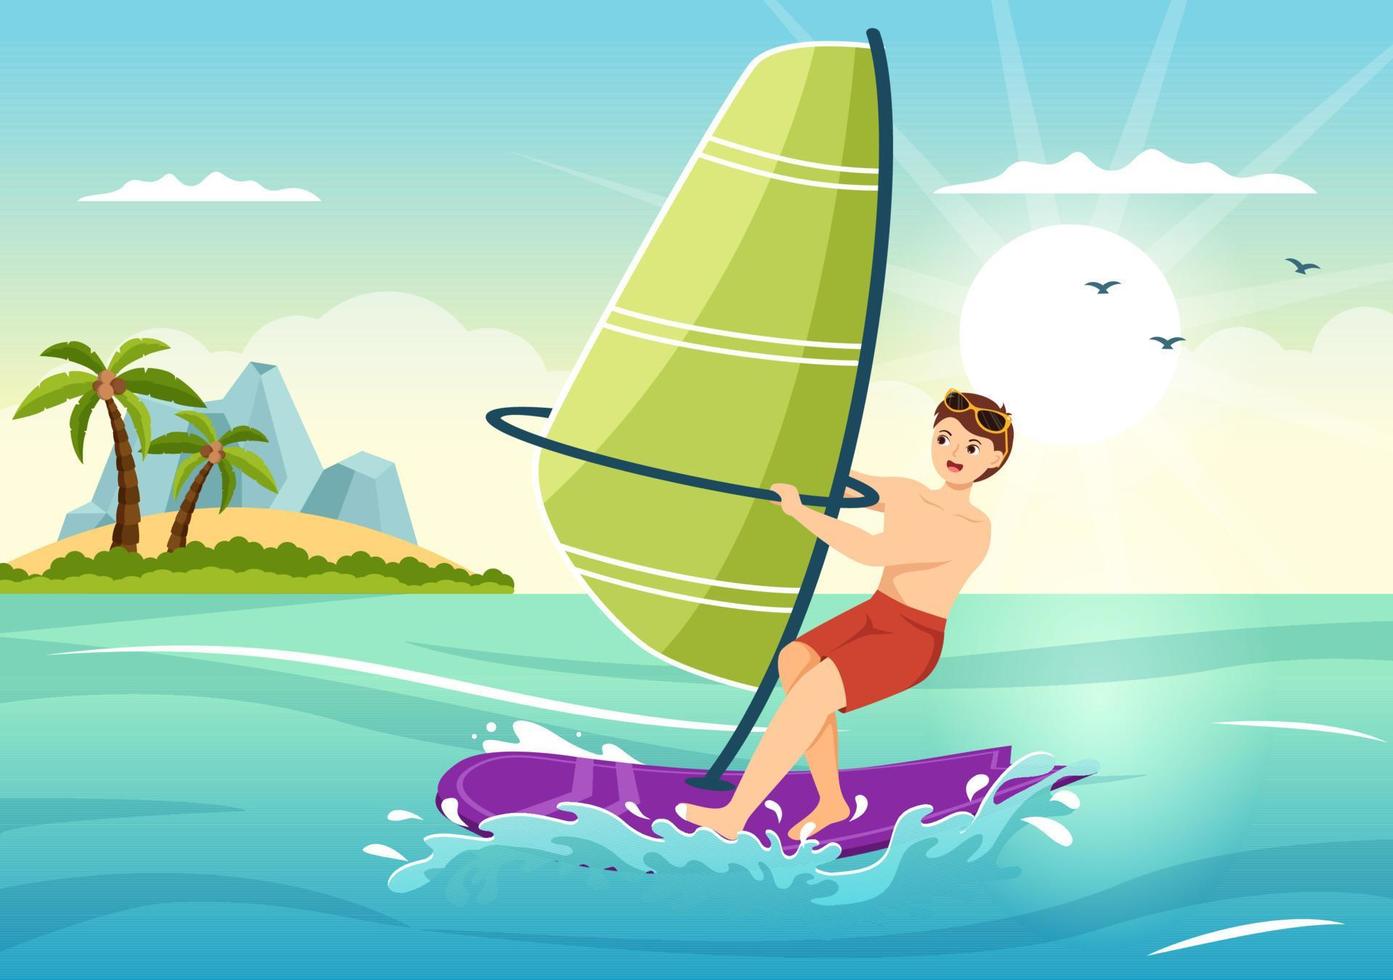 Windsurfing with the Person Standing on the Sailing Boat and Holding the Sail in Extreme Water Sport Flat Cartoon Hand Drawn Templates Illustration vector